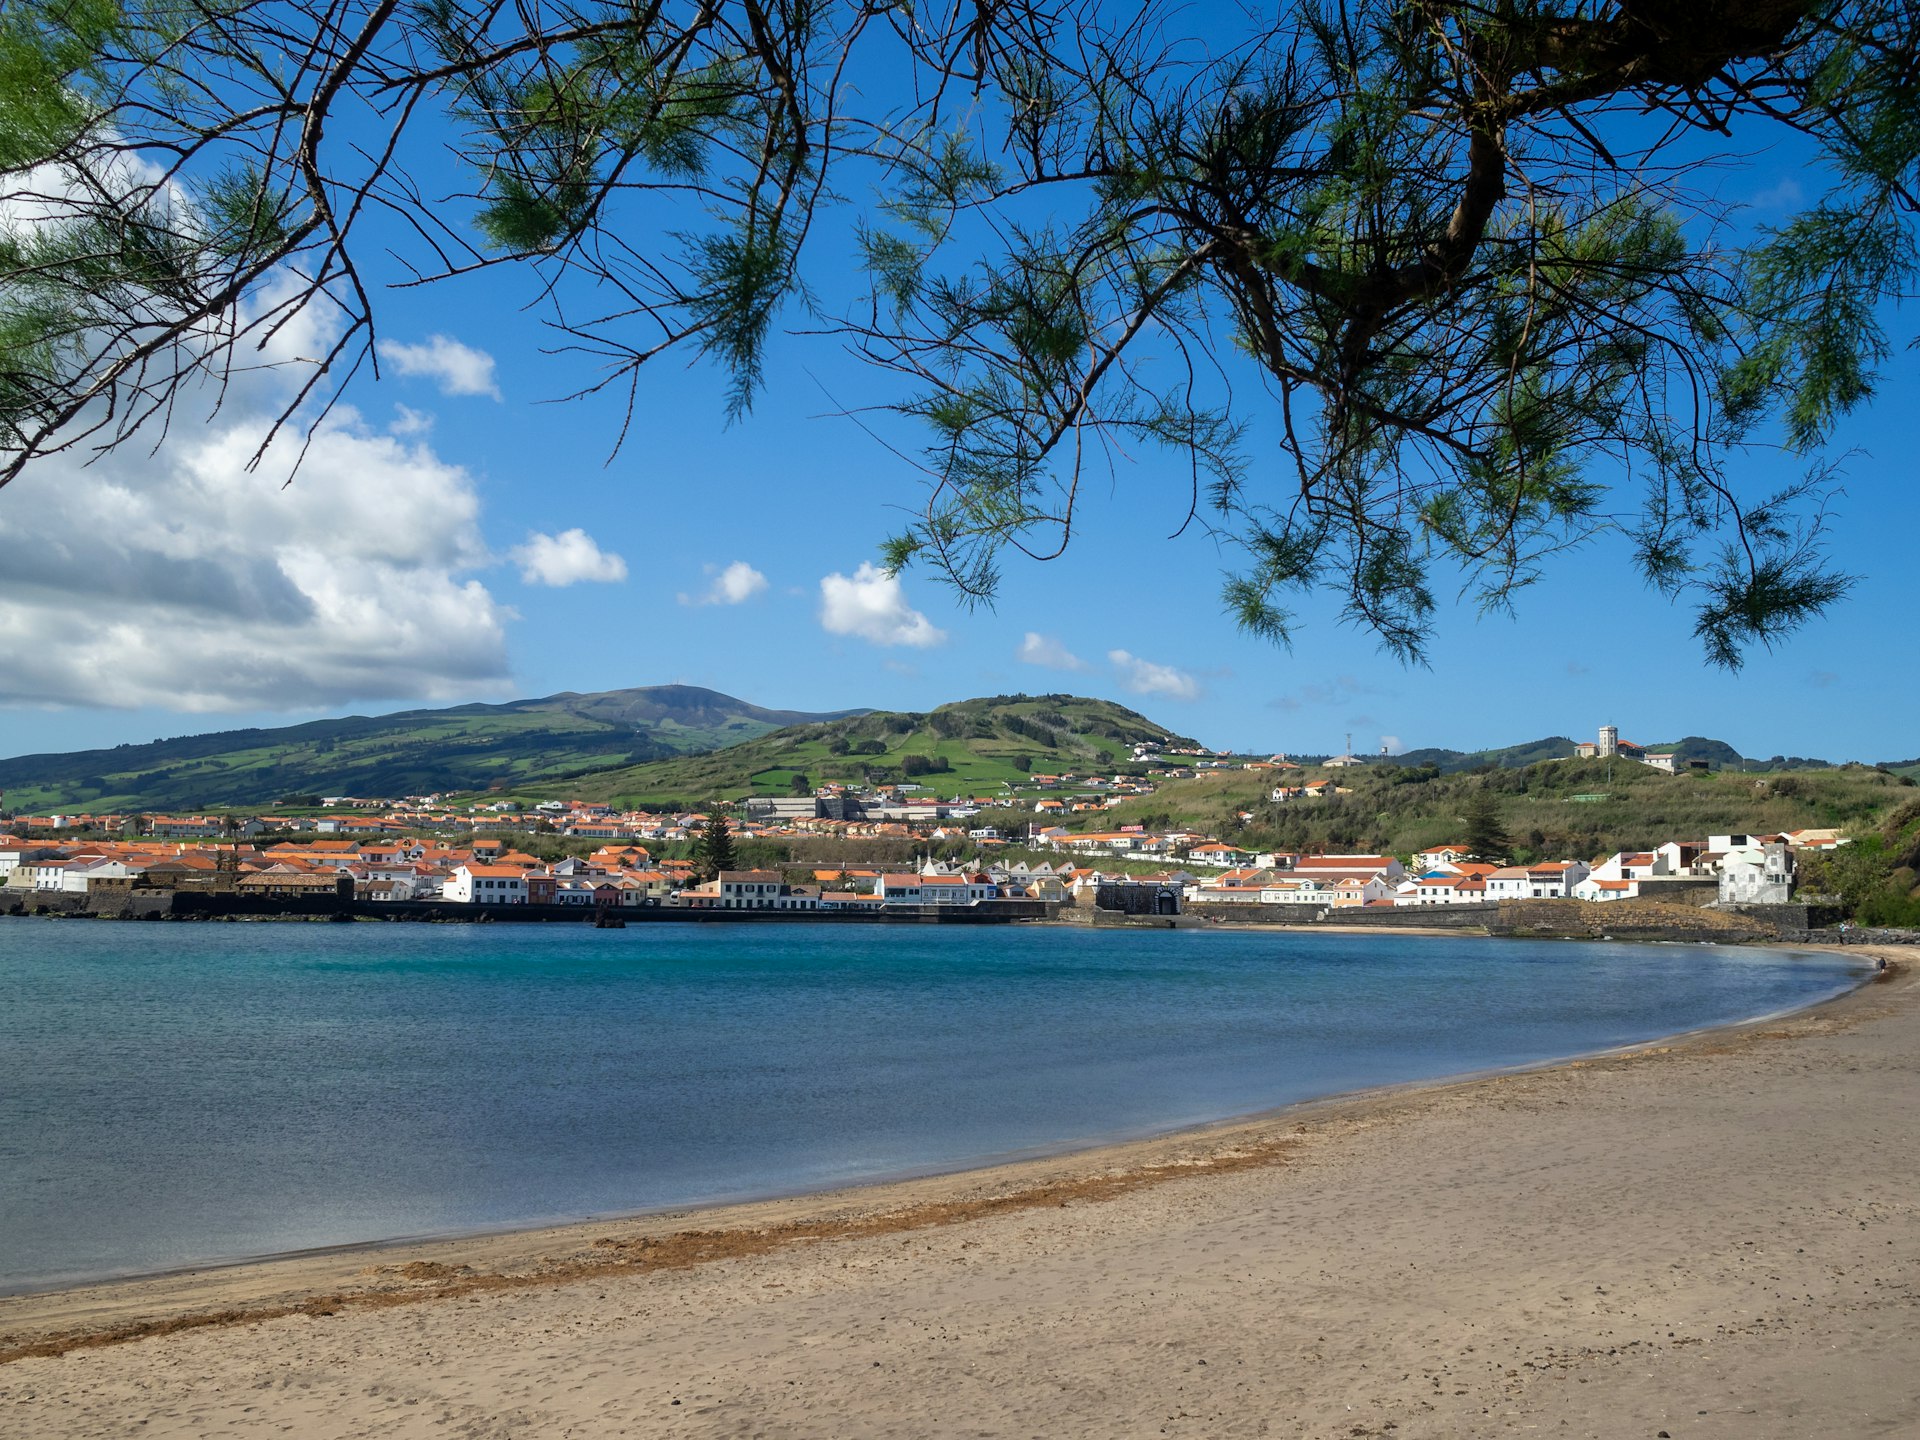 Wide angle view of Porto Pim brown sand beach, Faial Island in the Azores